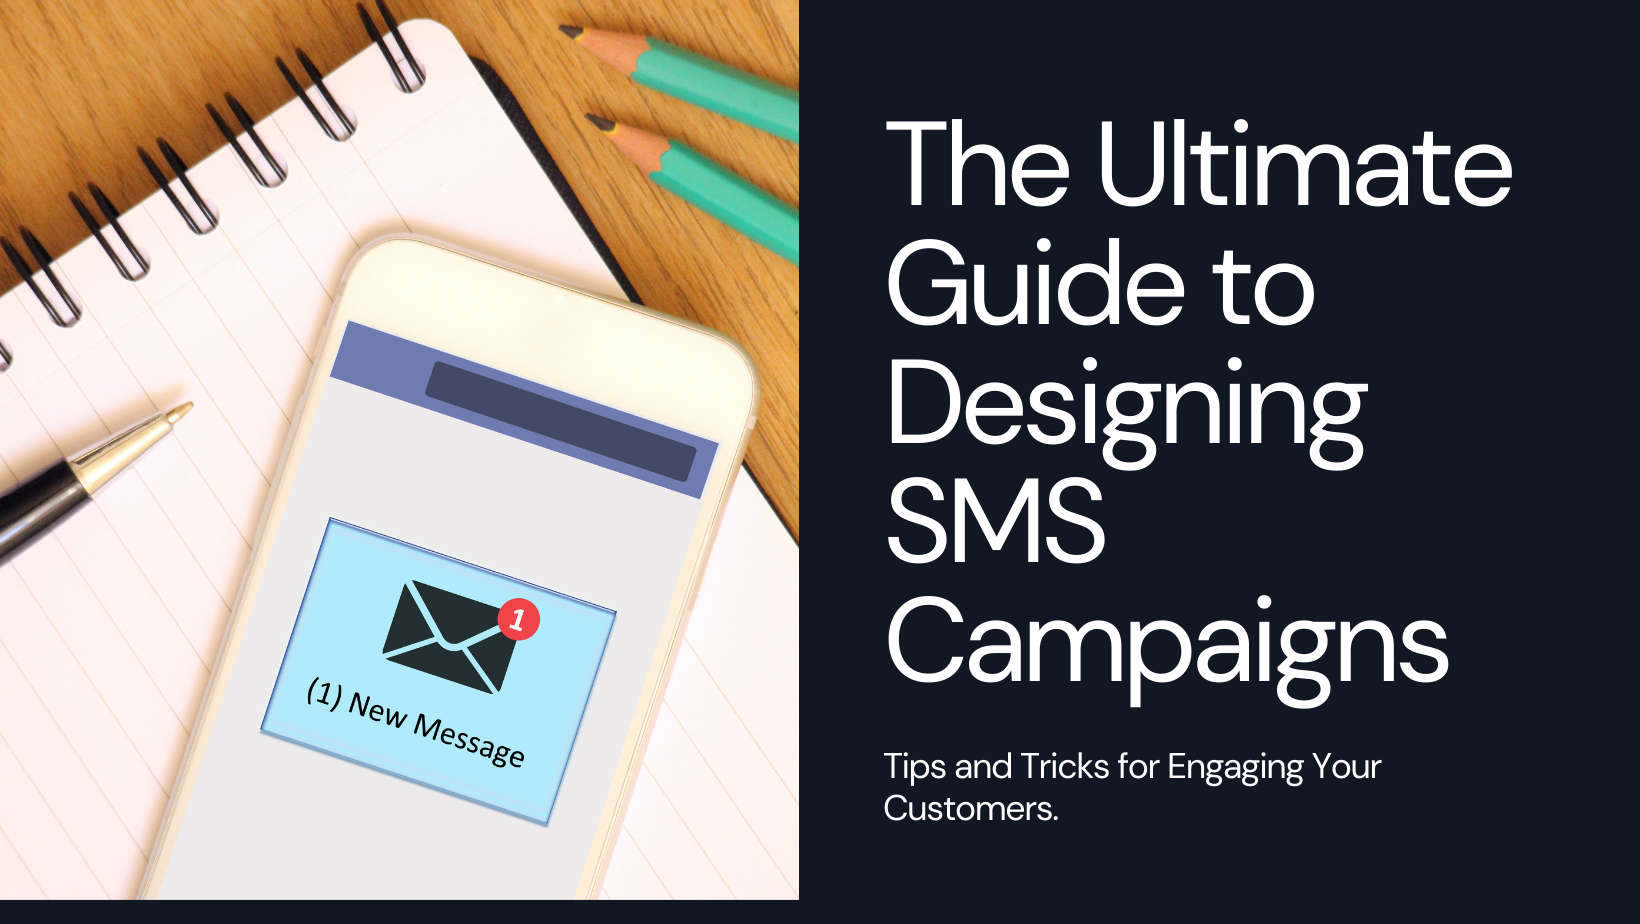 The Ultimate Guide to Creating SMS Campaign with HyperMarketing